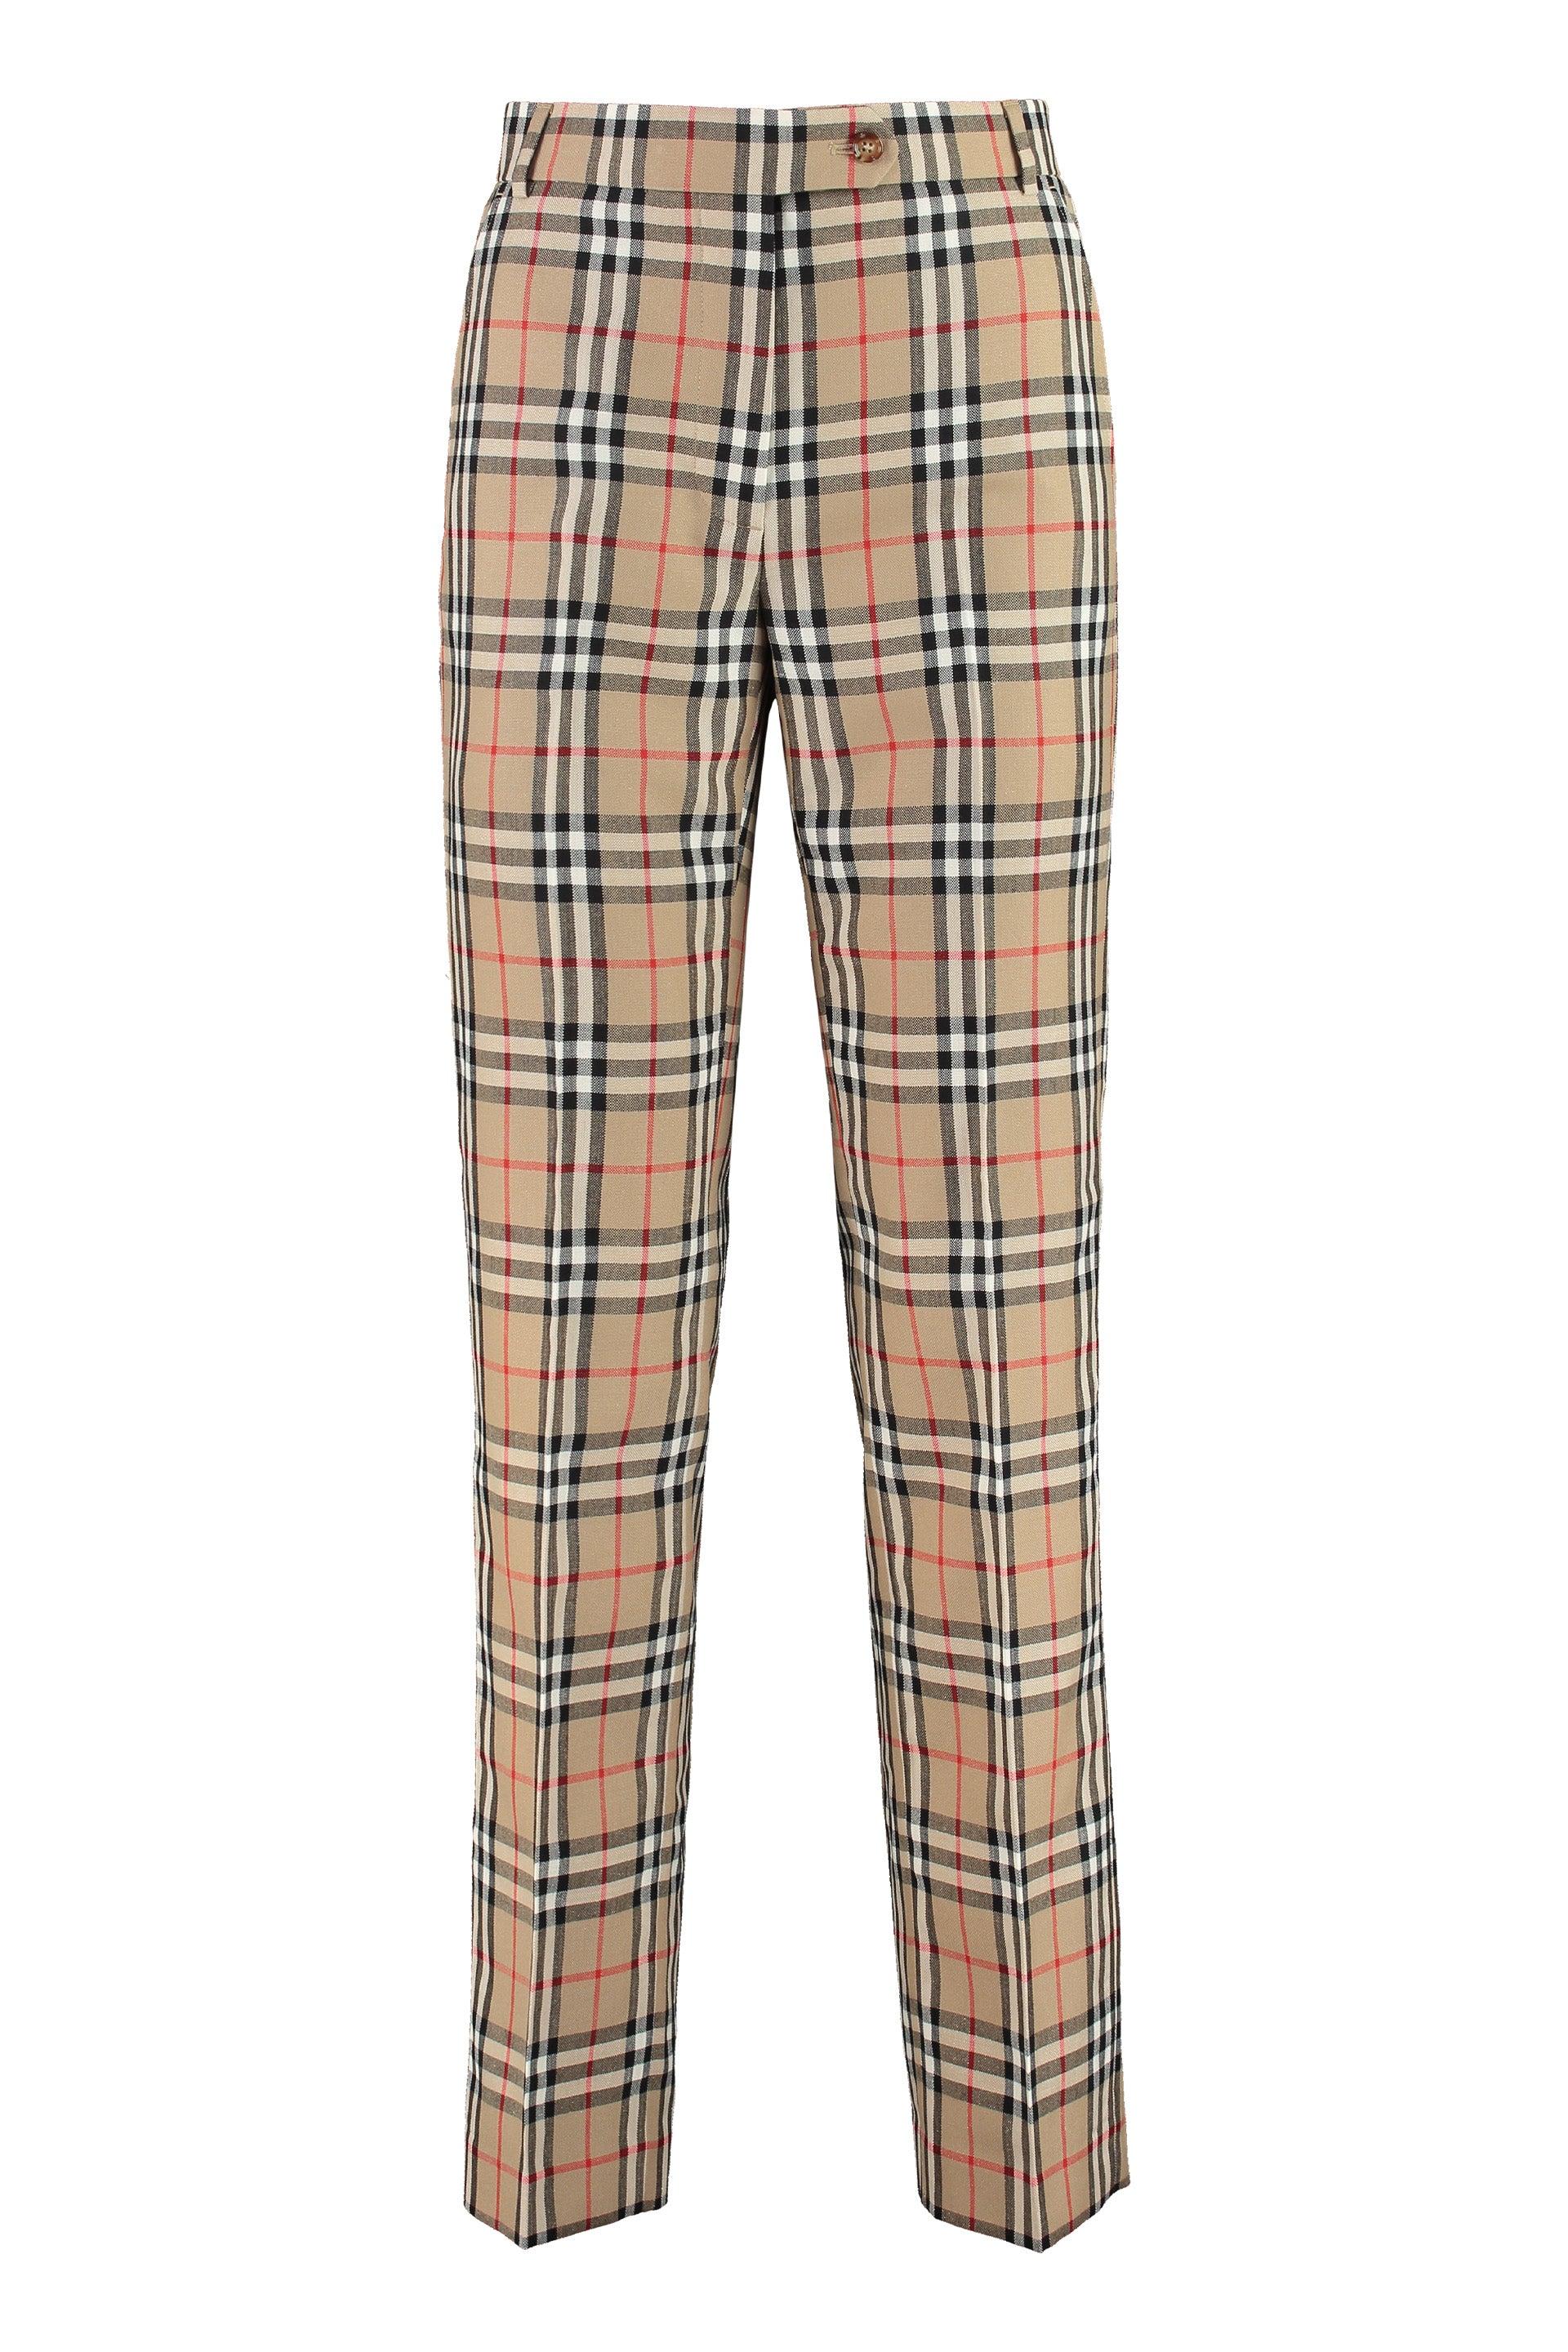 Burberry Vintage Check Tailored Natural | Lyst